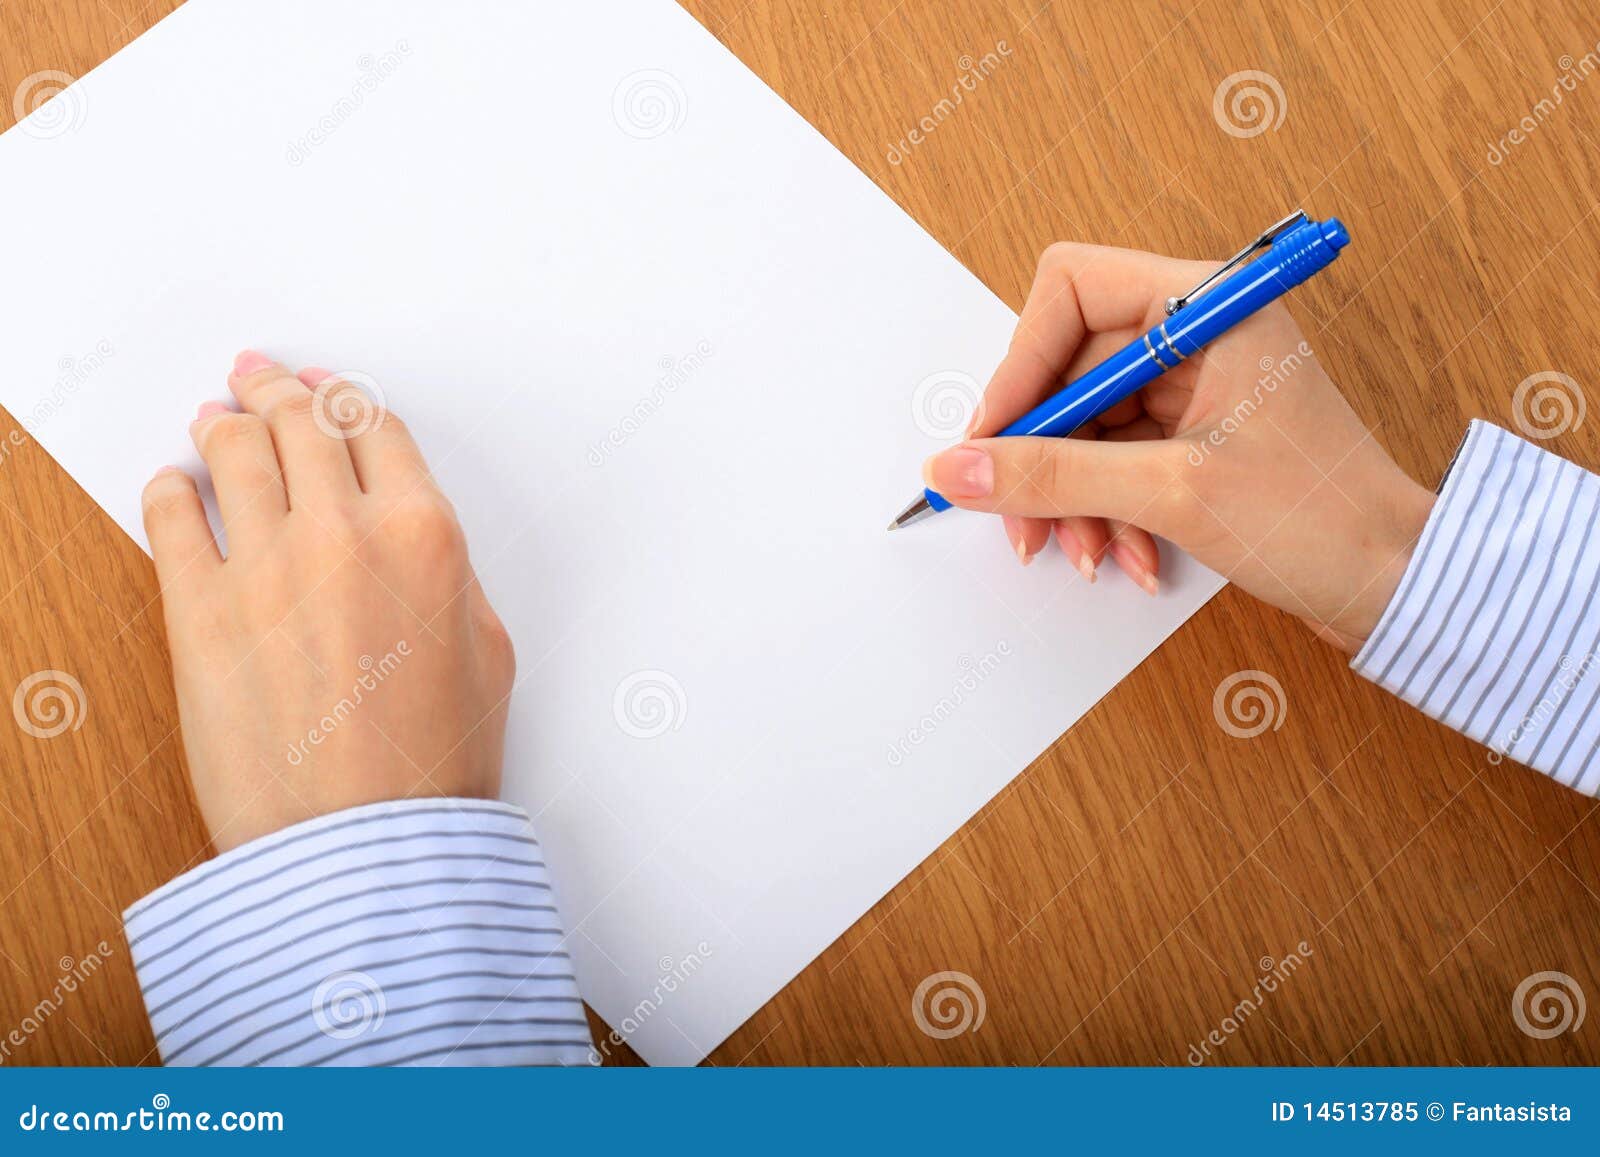 Female Hand Signing Contract. Stock Image - Image of financial ...